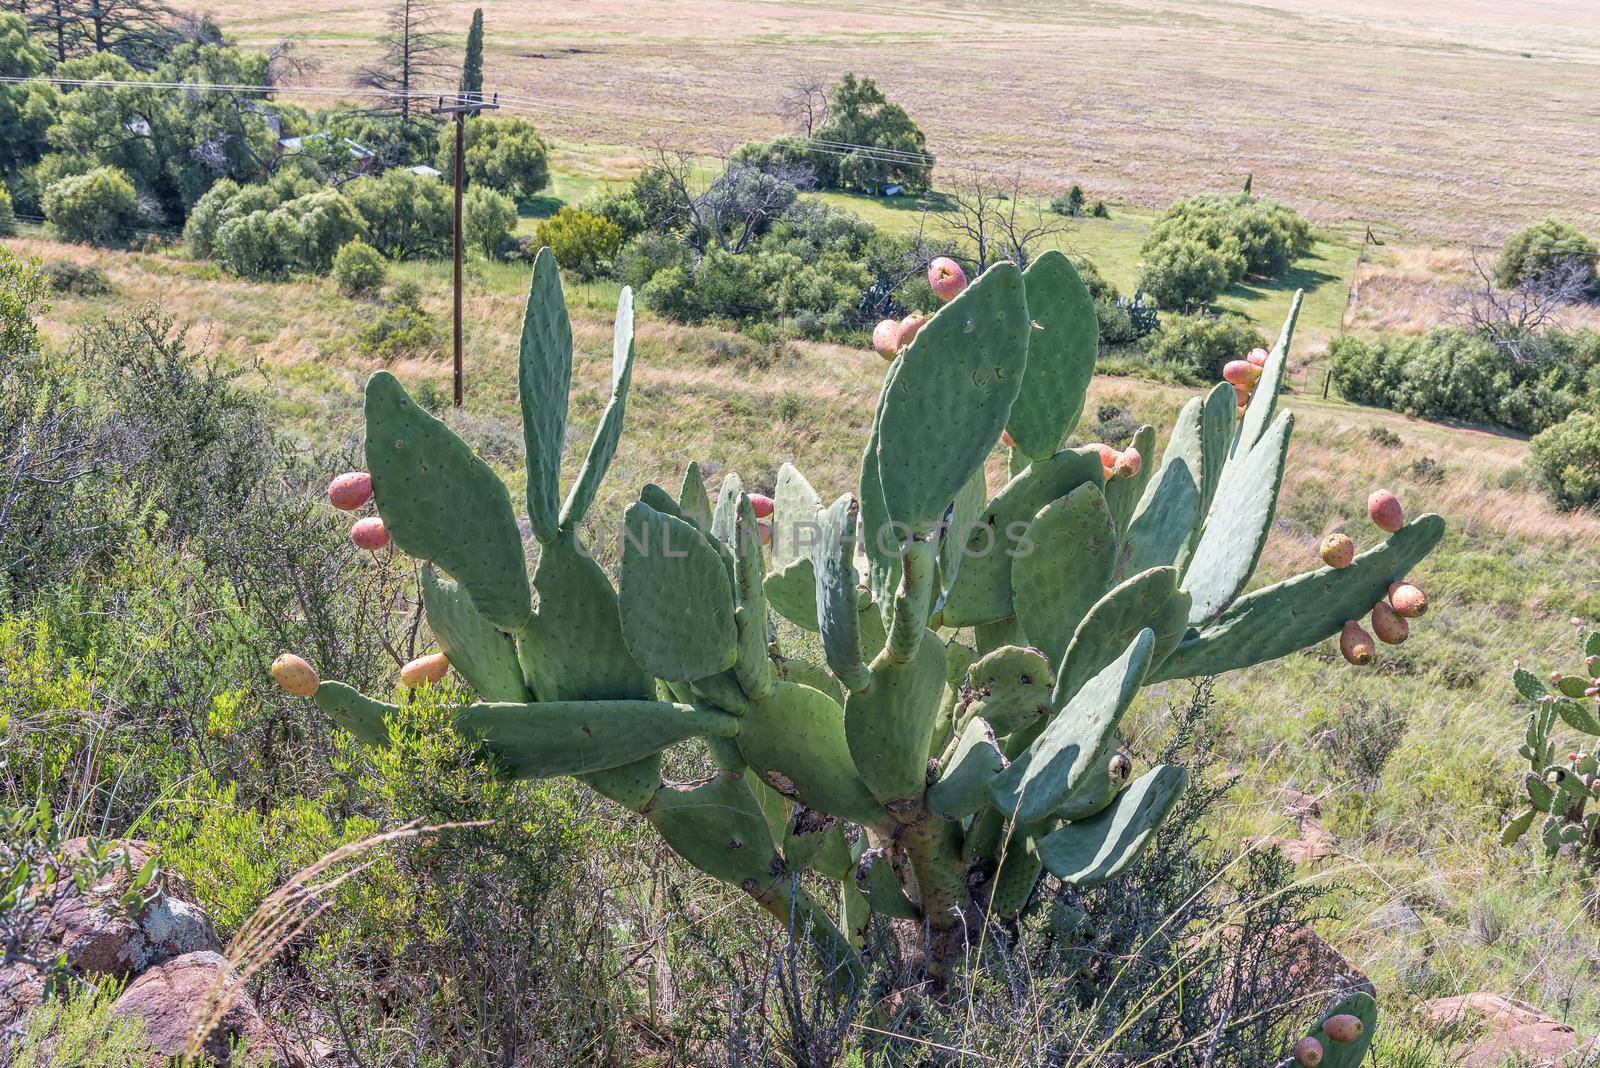 A prickly pear plant with fruit on a farm near Bloemfontein